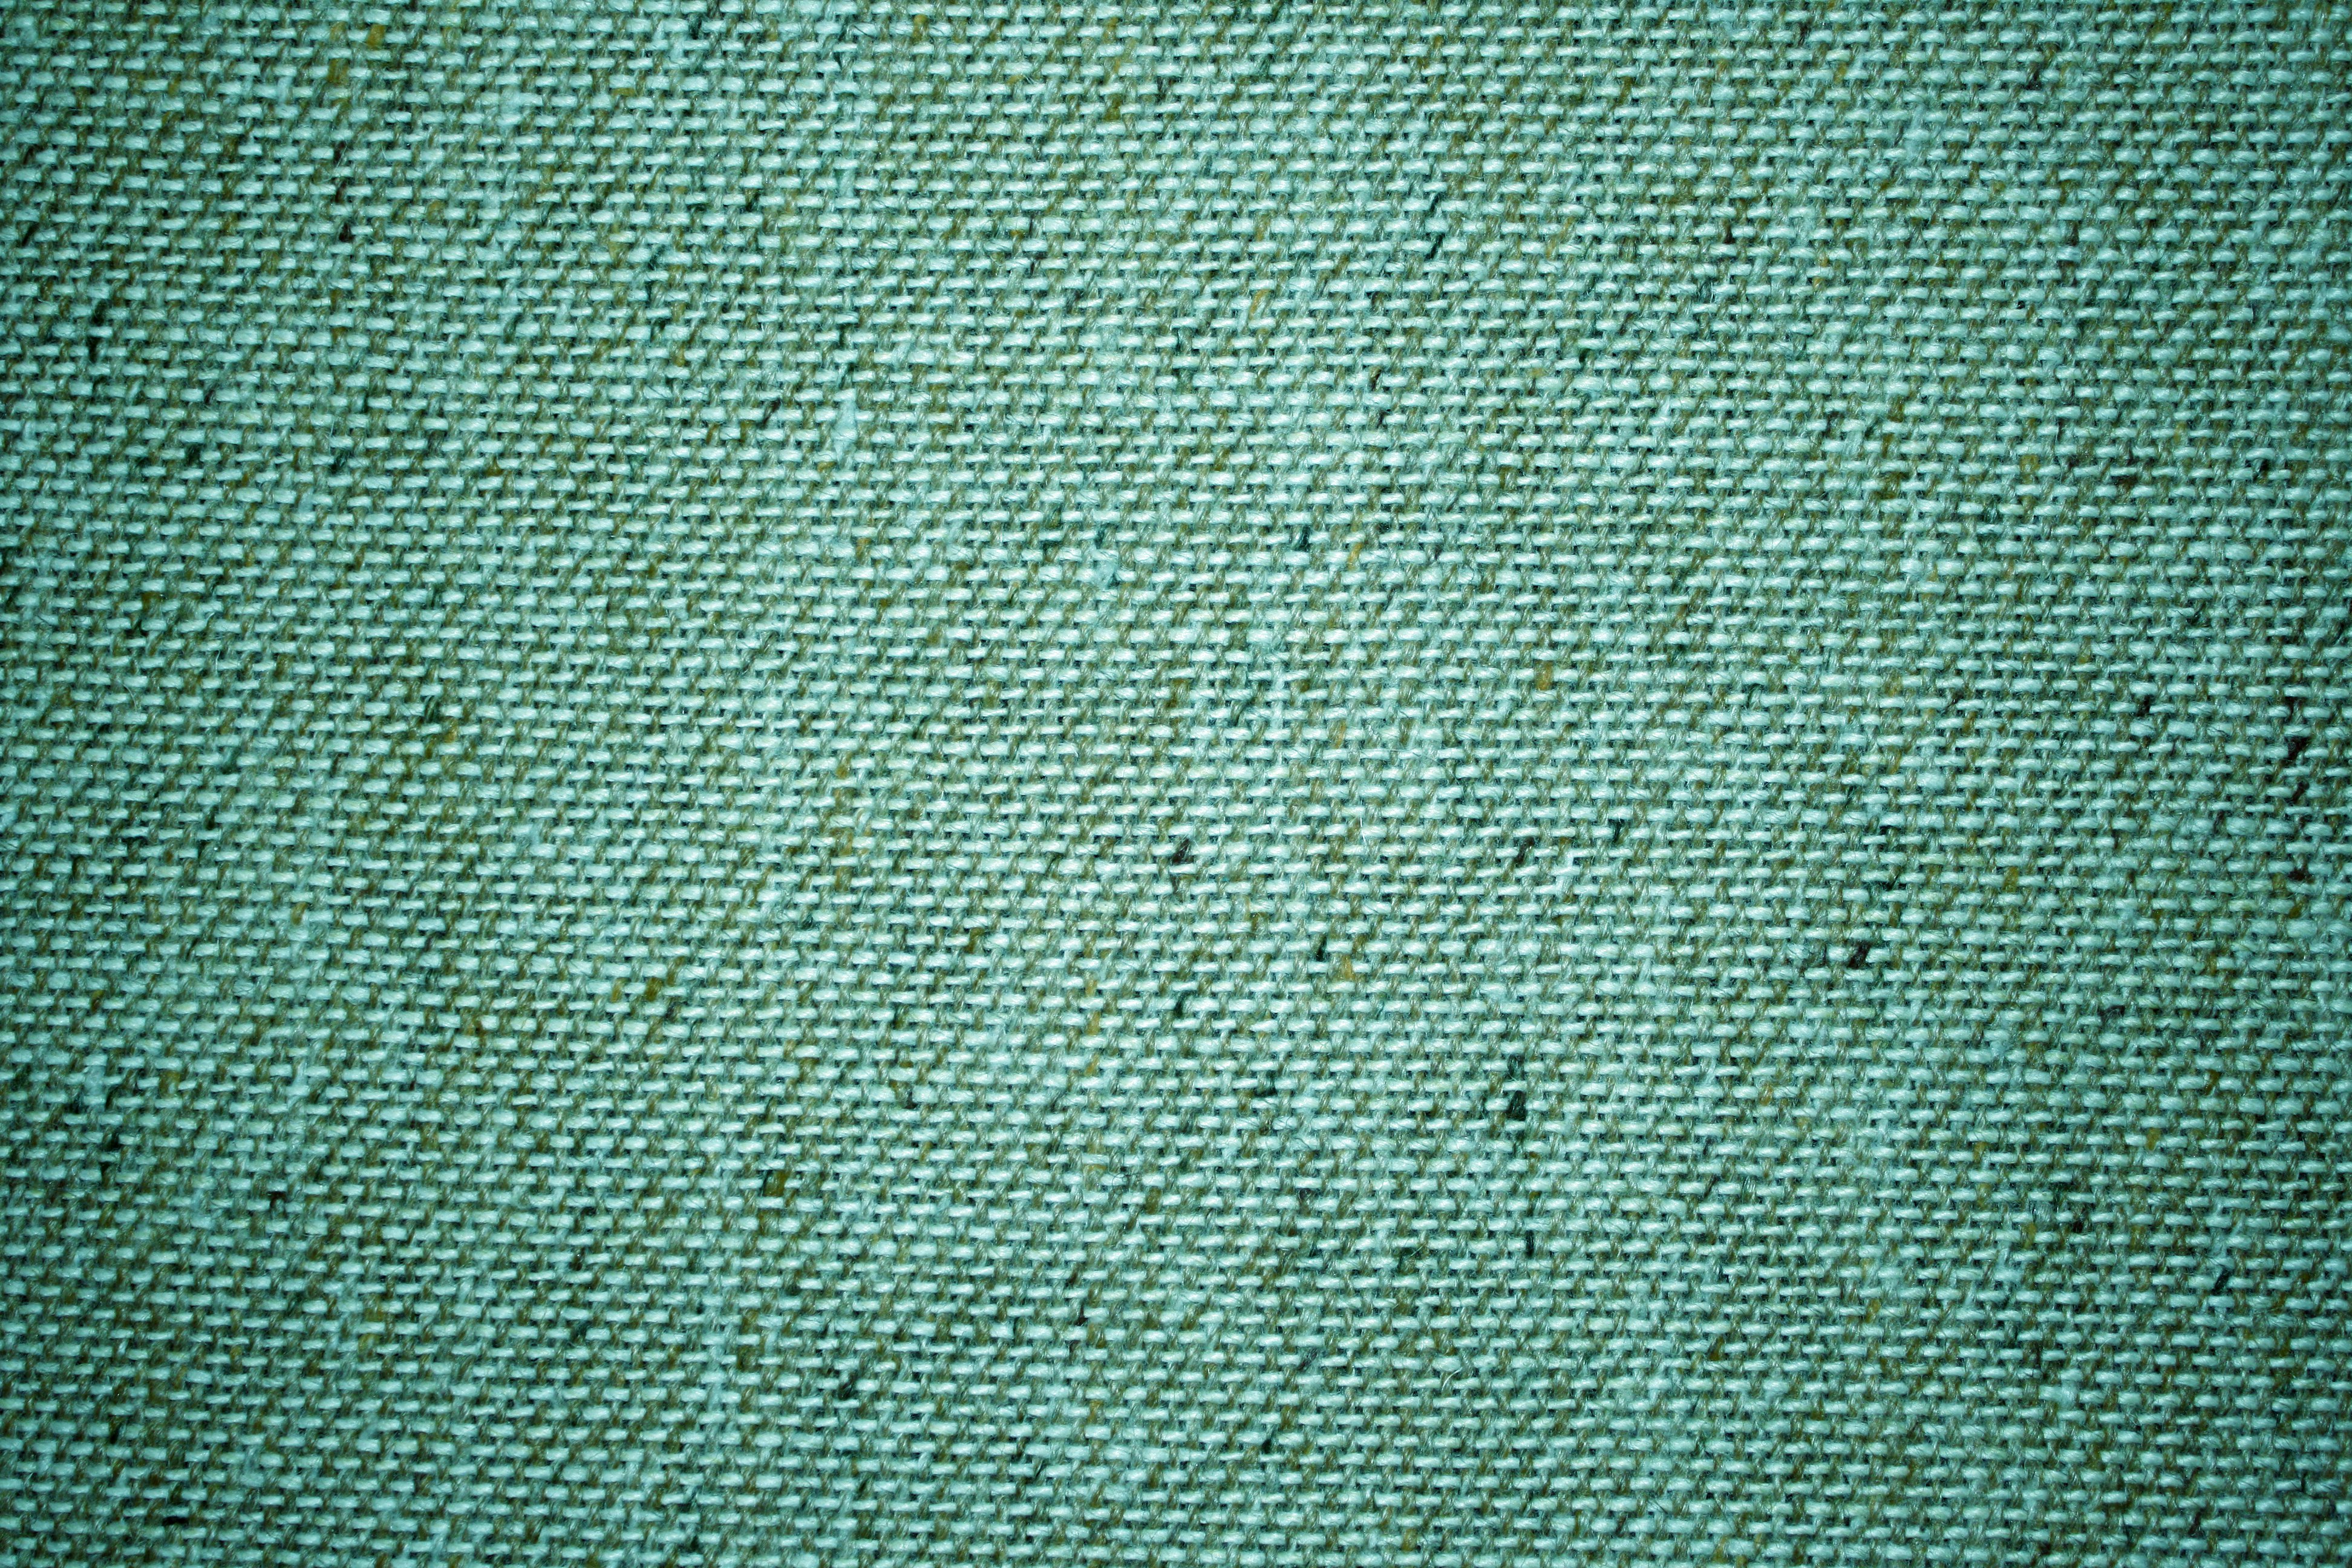 Teal Green Upholstery Fabric Close Up Texture - Free High ...